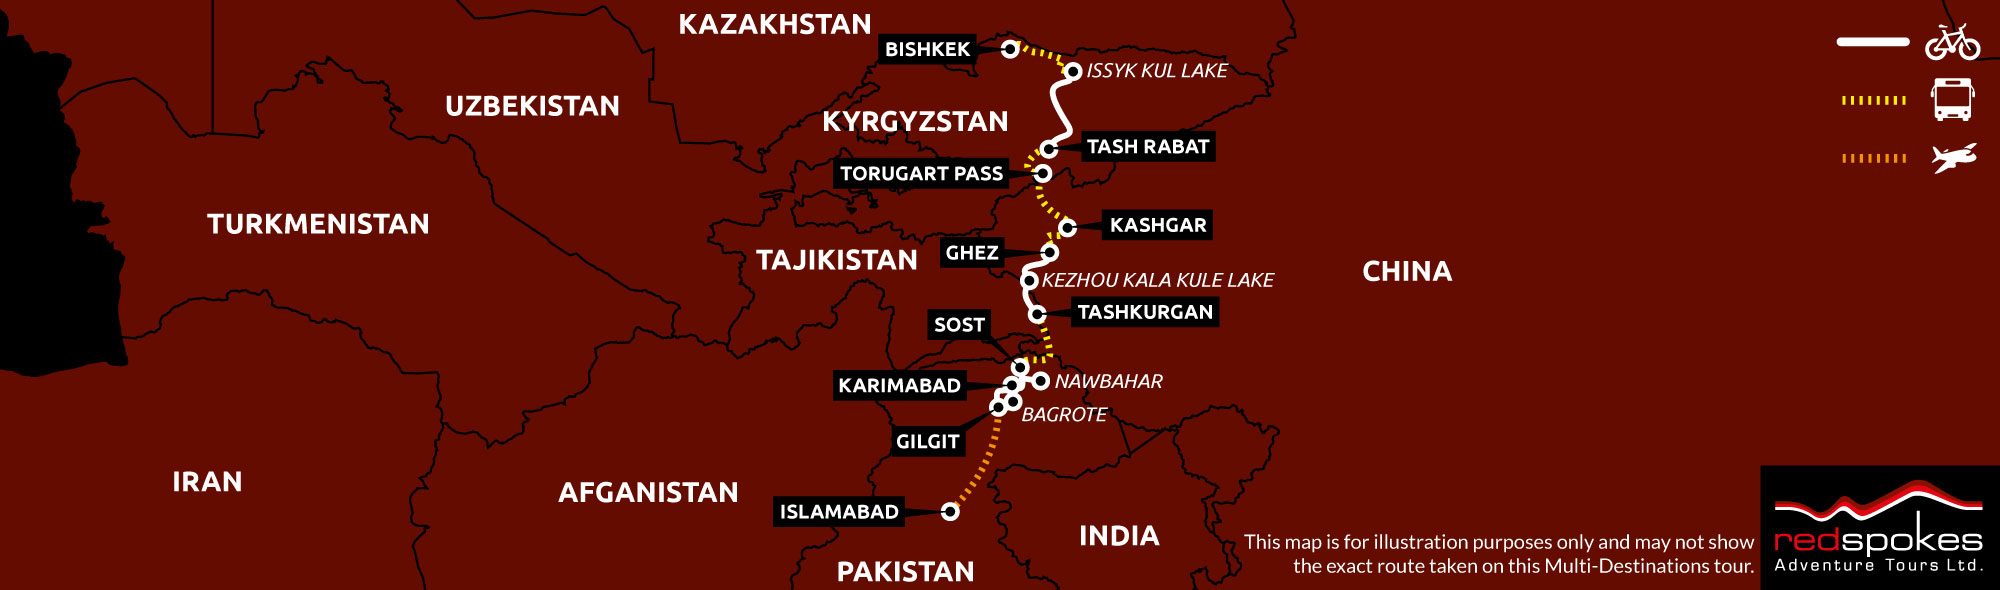 Example route for this Kyrgyzstan cycling holiday